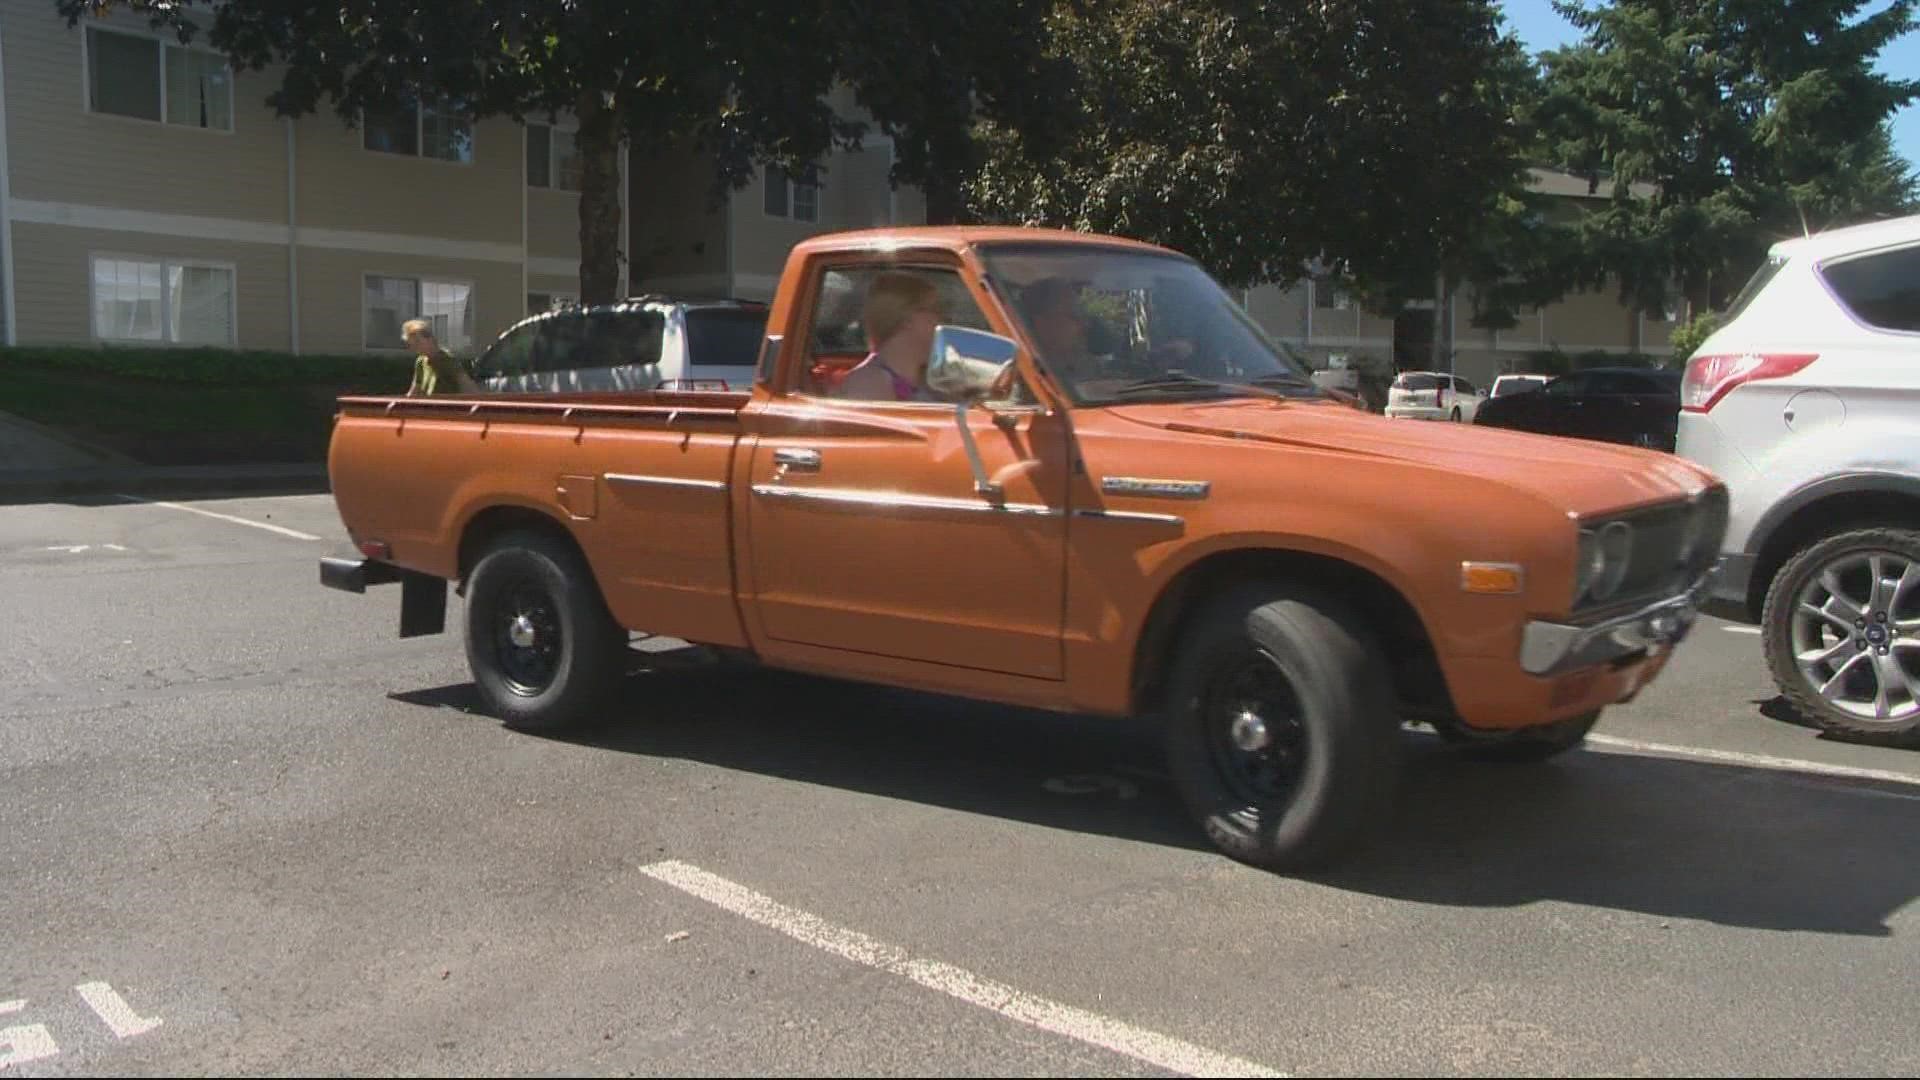 Jesse Christensen spent three years repairing his 1974 Datsun pickup after it was stolen and damaged. This week it was stolen again, but he was able to find it.